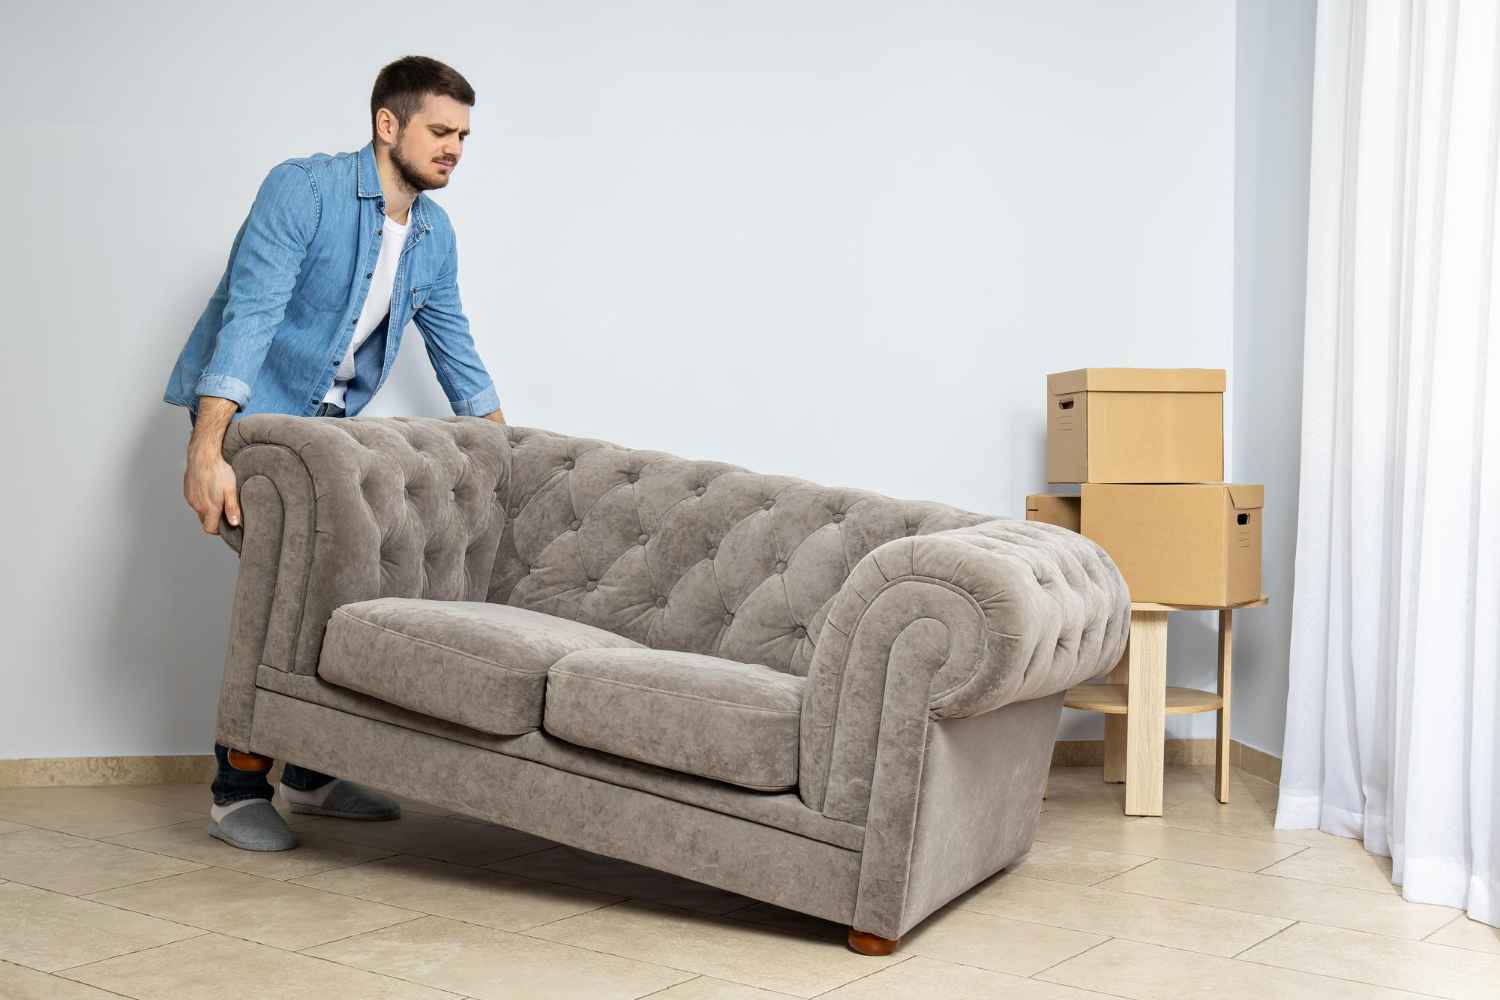 Guide to Removal of Sofas